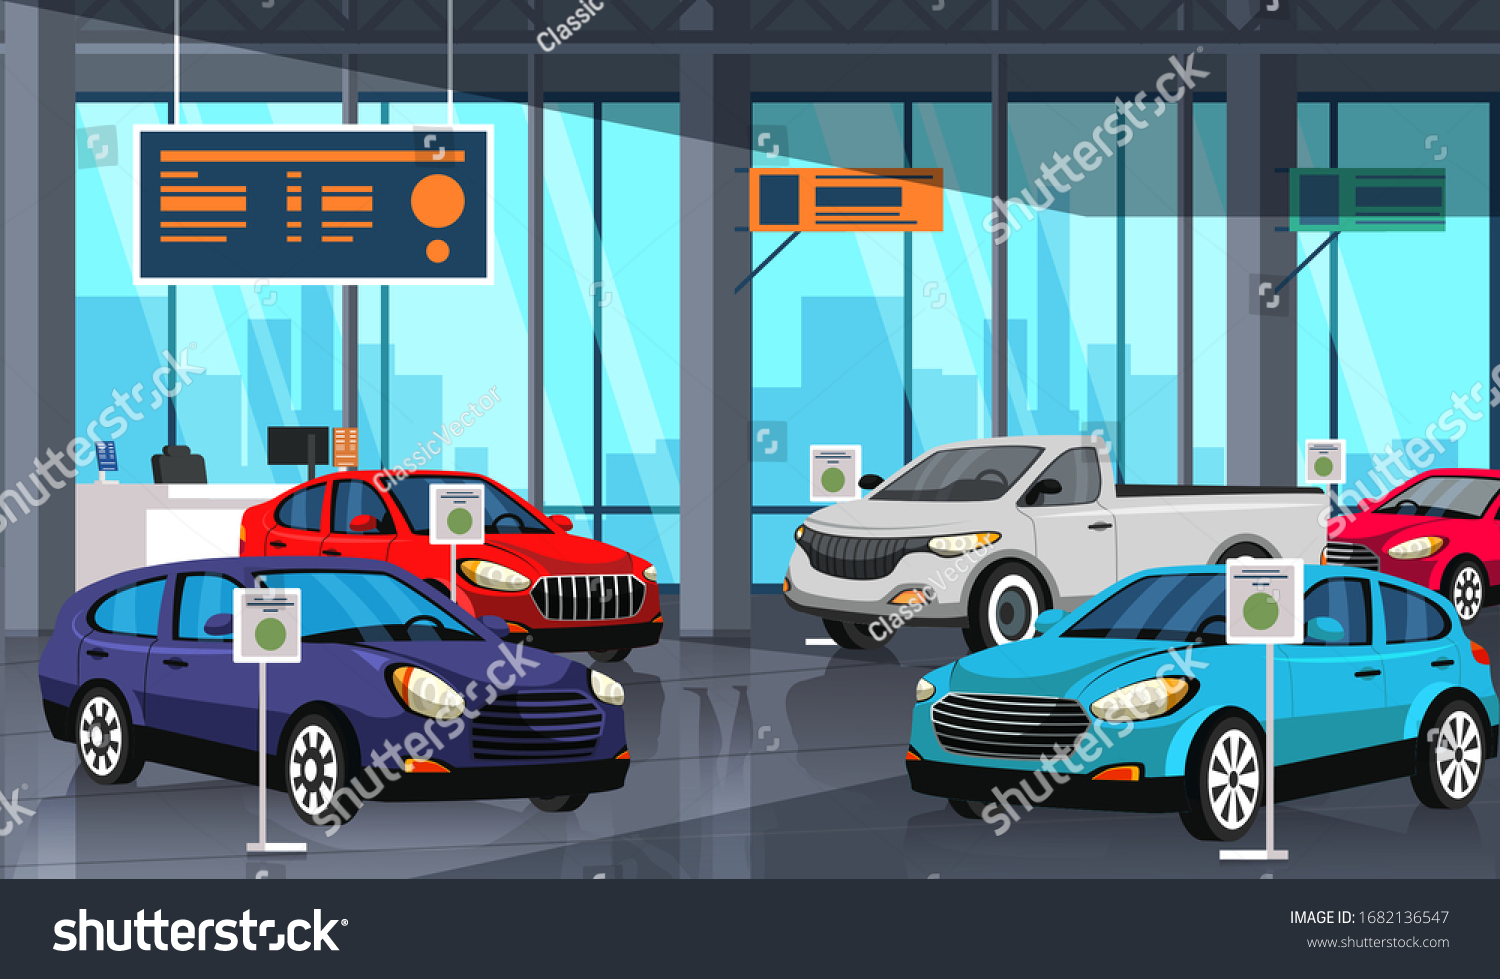 SVG of Cartoon car showroom center with autos exhibition inside. Automobile dealership store shop interior. New modern vehicles models demonstration, sale and trading. Vector flat illustration svg